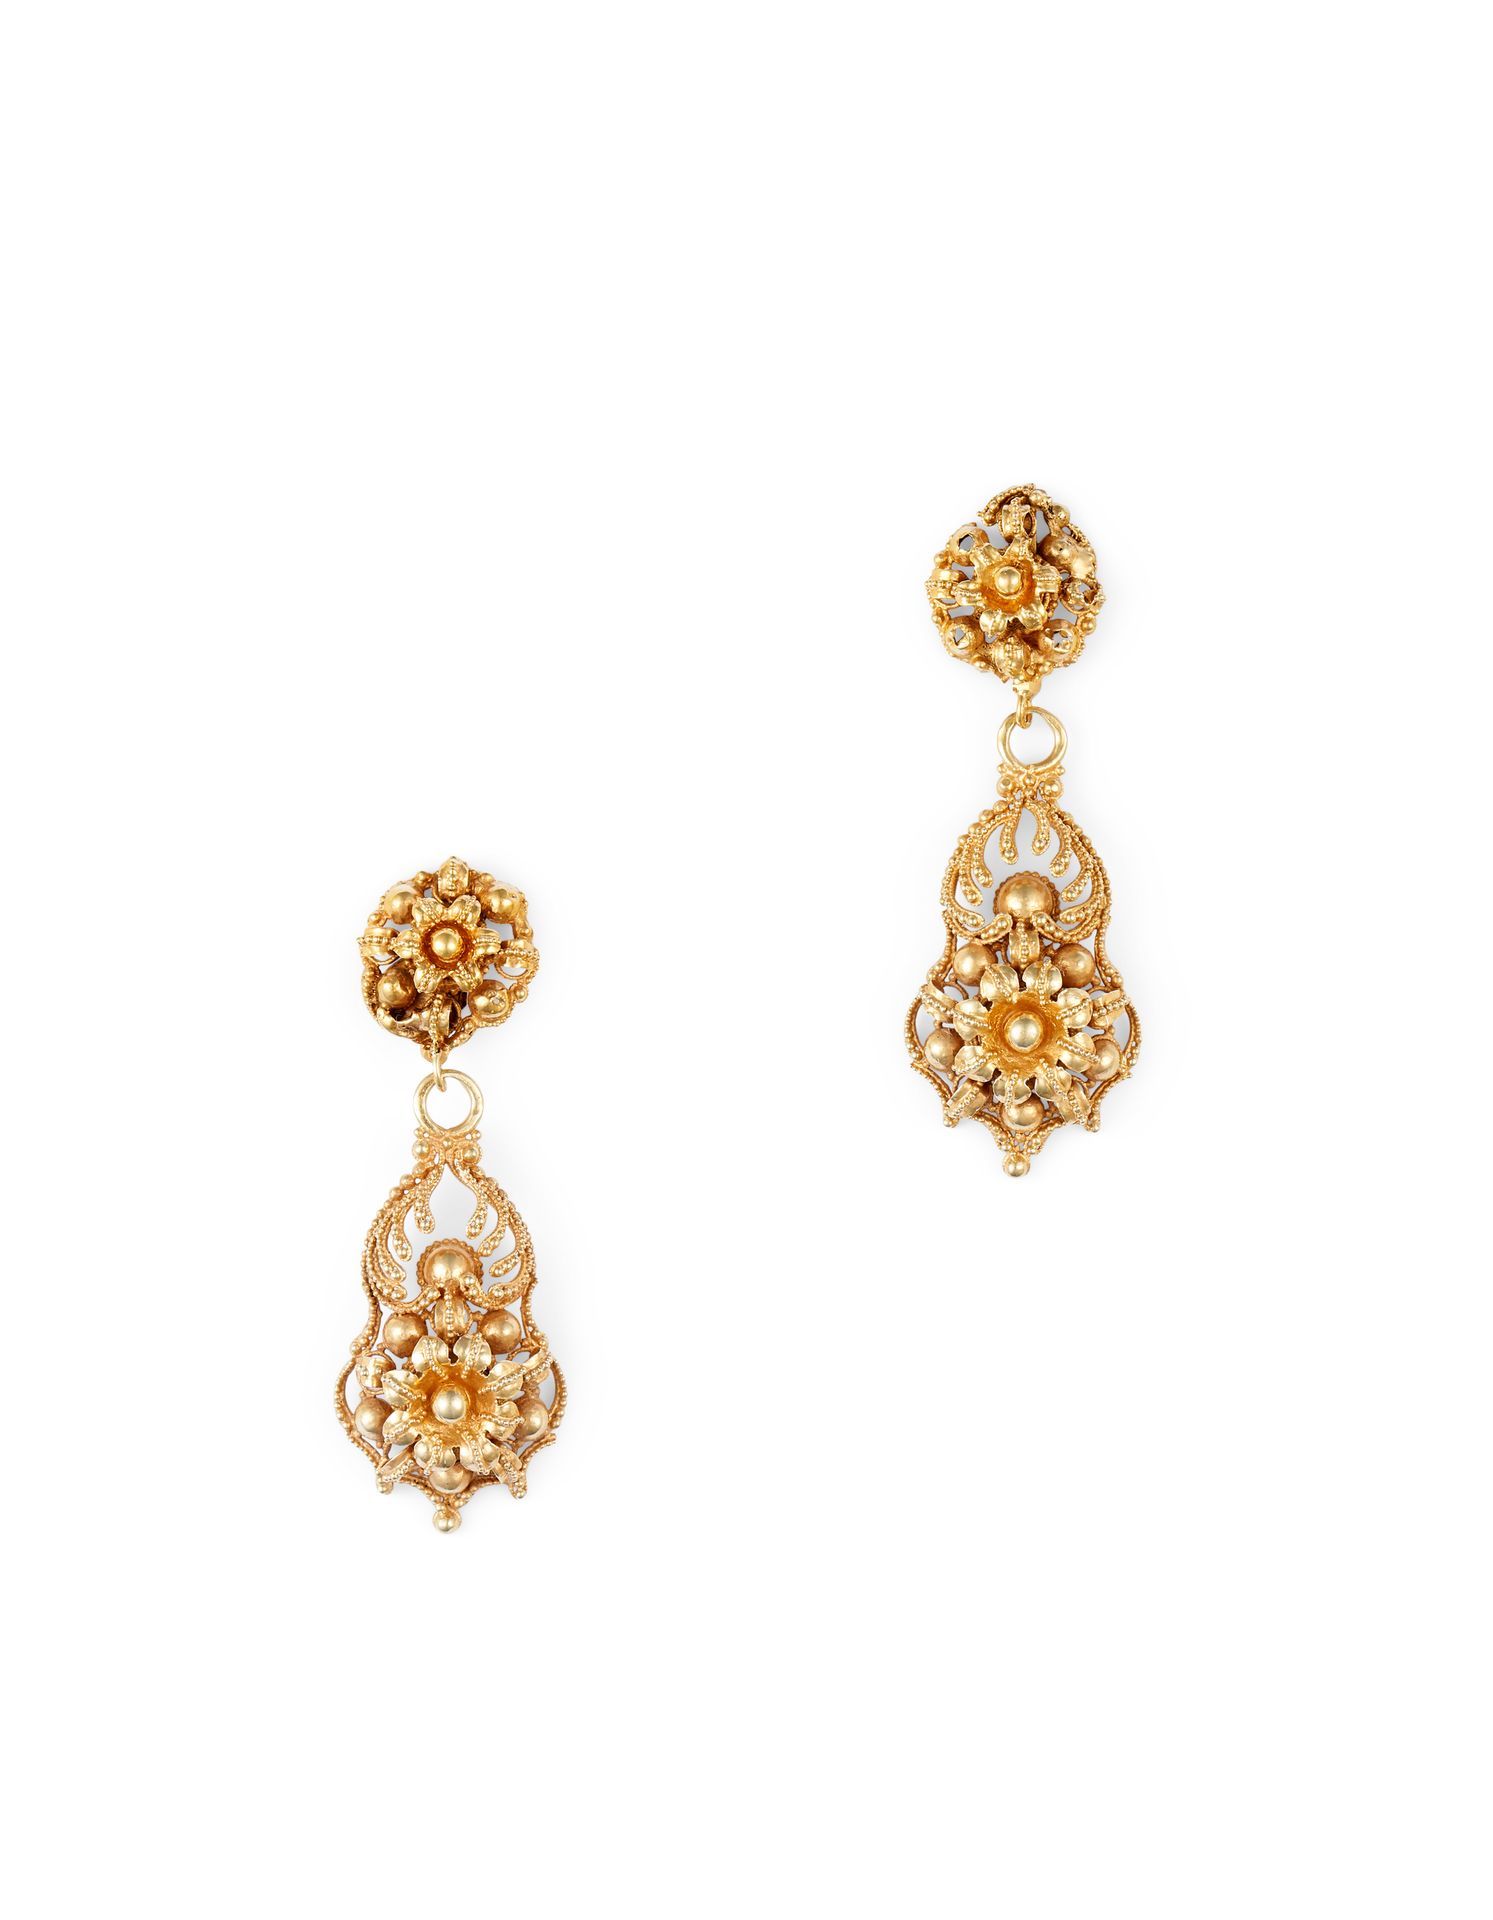 Null FILIGREE EARRINGS In 18K filigree yellow gold with a flower shaped motif.

&hellip;